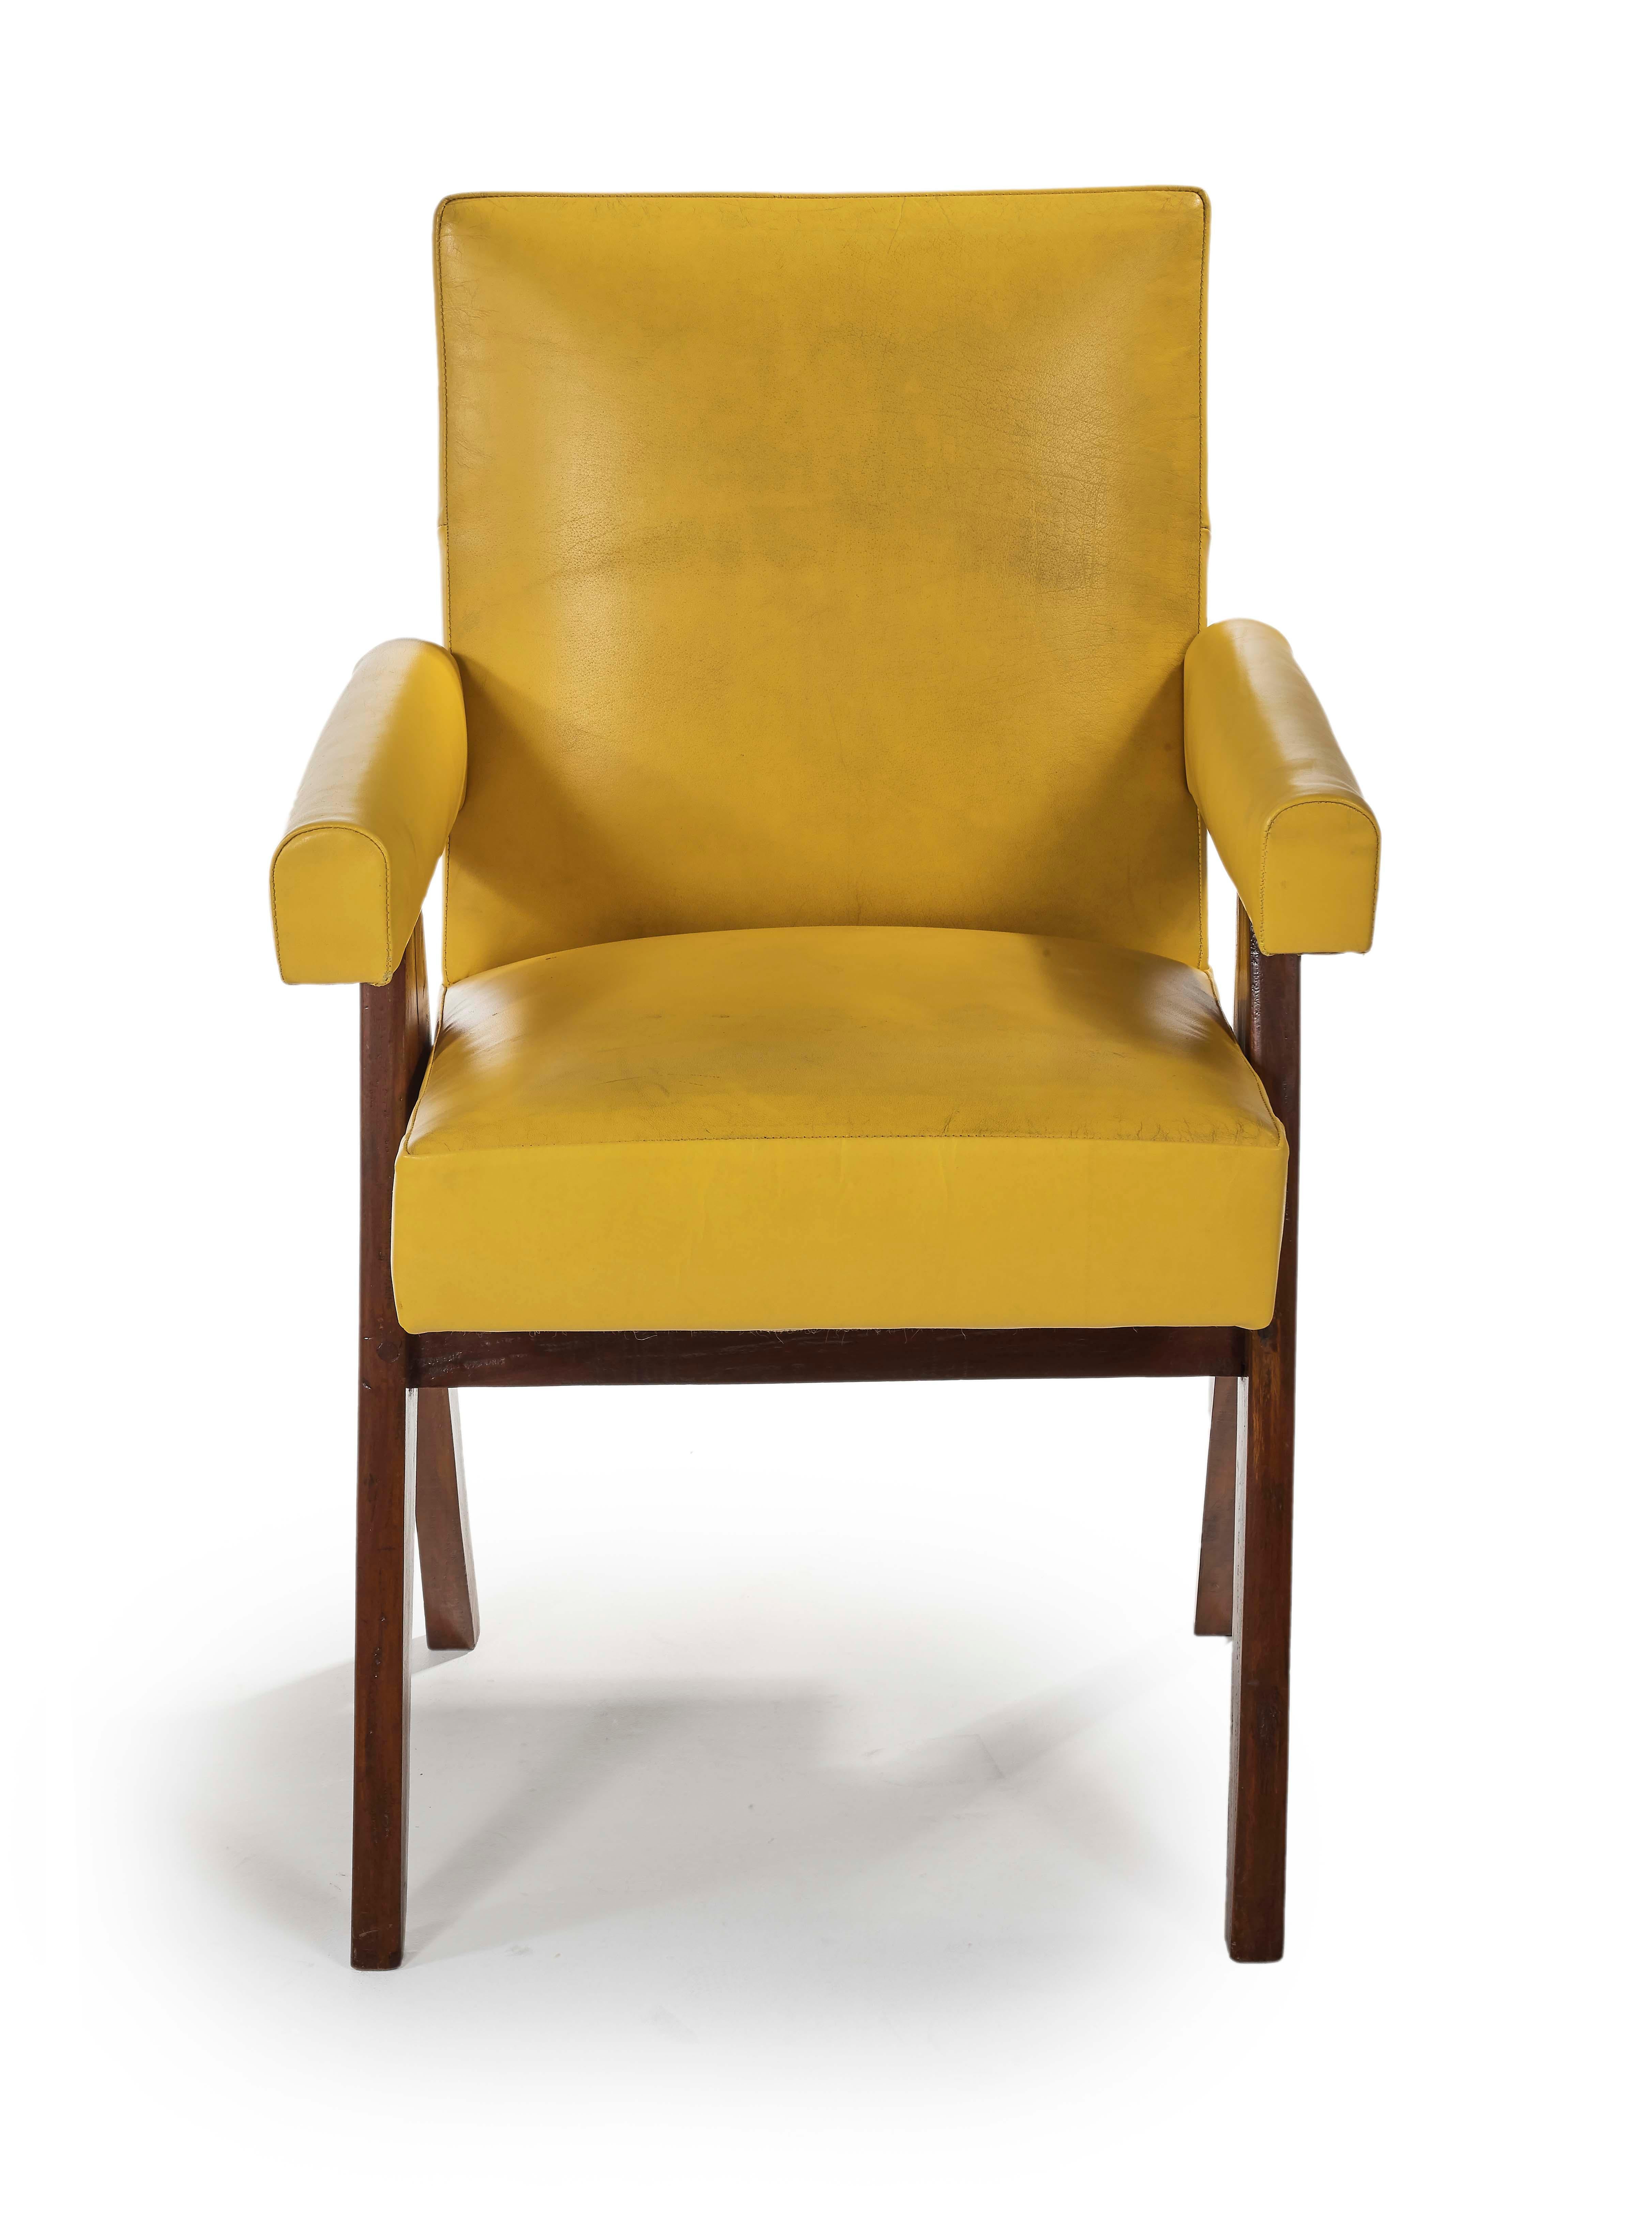 Pierre Jeanneret
PJ-SI-30-C
Committee Armchair, circa 1955.
Solid teak. Vintage leather.
Original condition, marks, patina.
Various administrative buildings. Chandigarh India
Important : vintage collector's item for sale with guaranteed